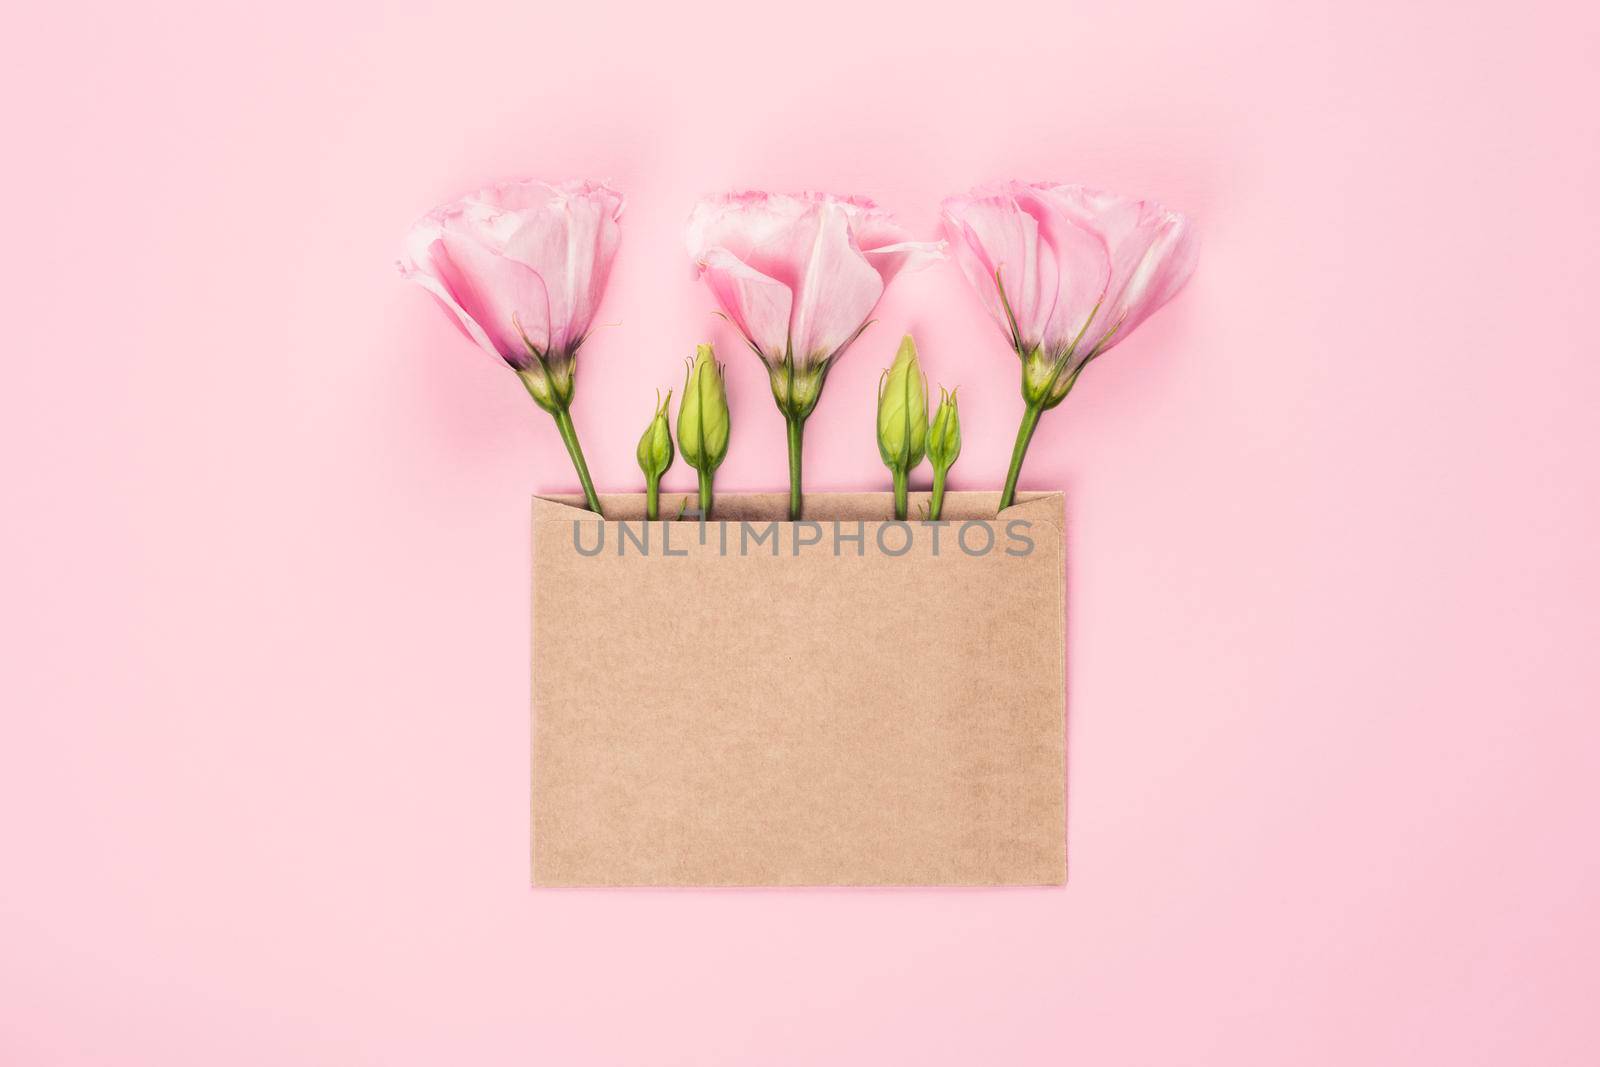 Trendy monochrome banner for Valentines Day, International Womens Day or mothers day. Party or wedding invitation. Eustoma flower arrangement with flowers and blank card, on pink background